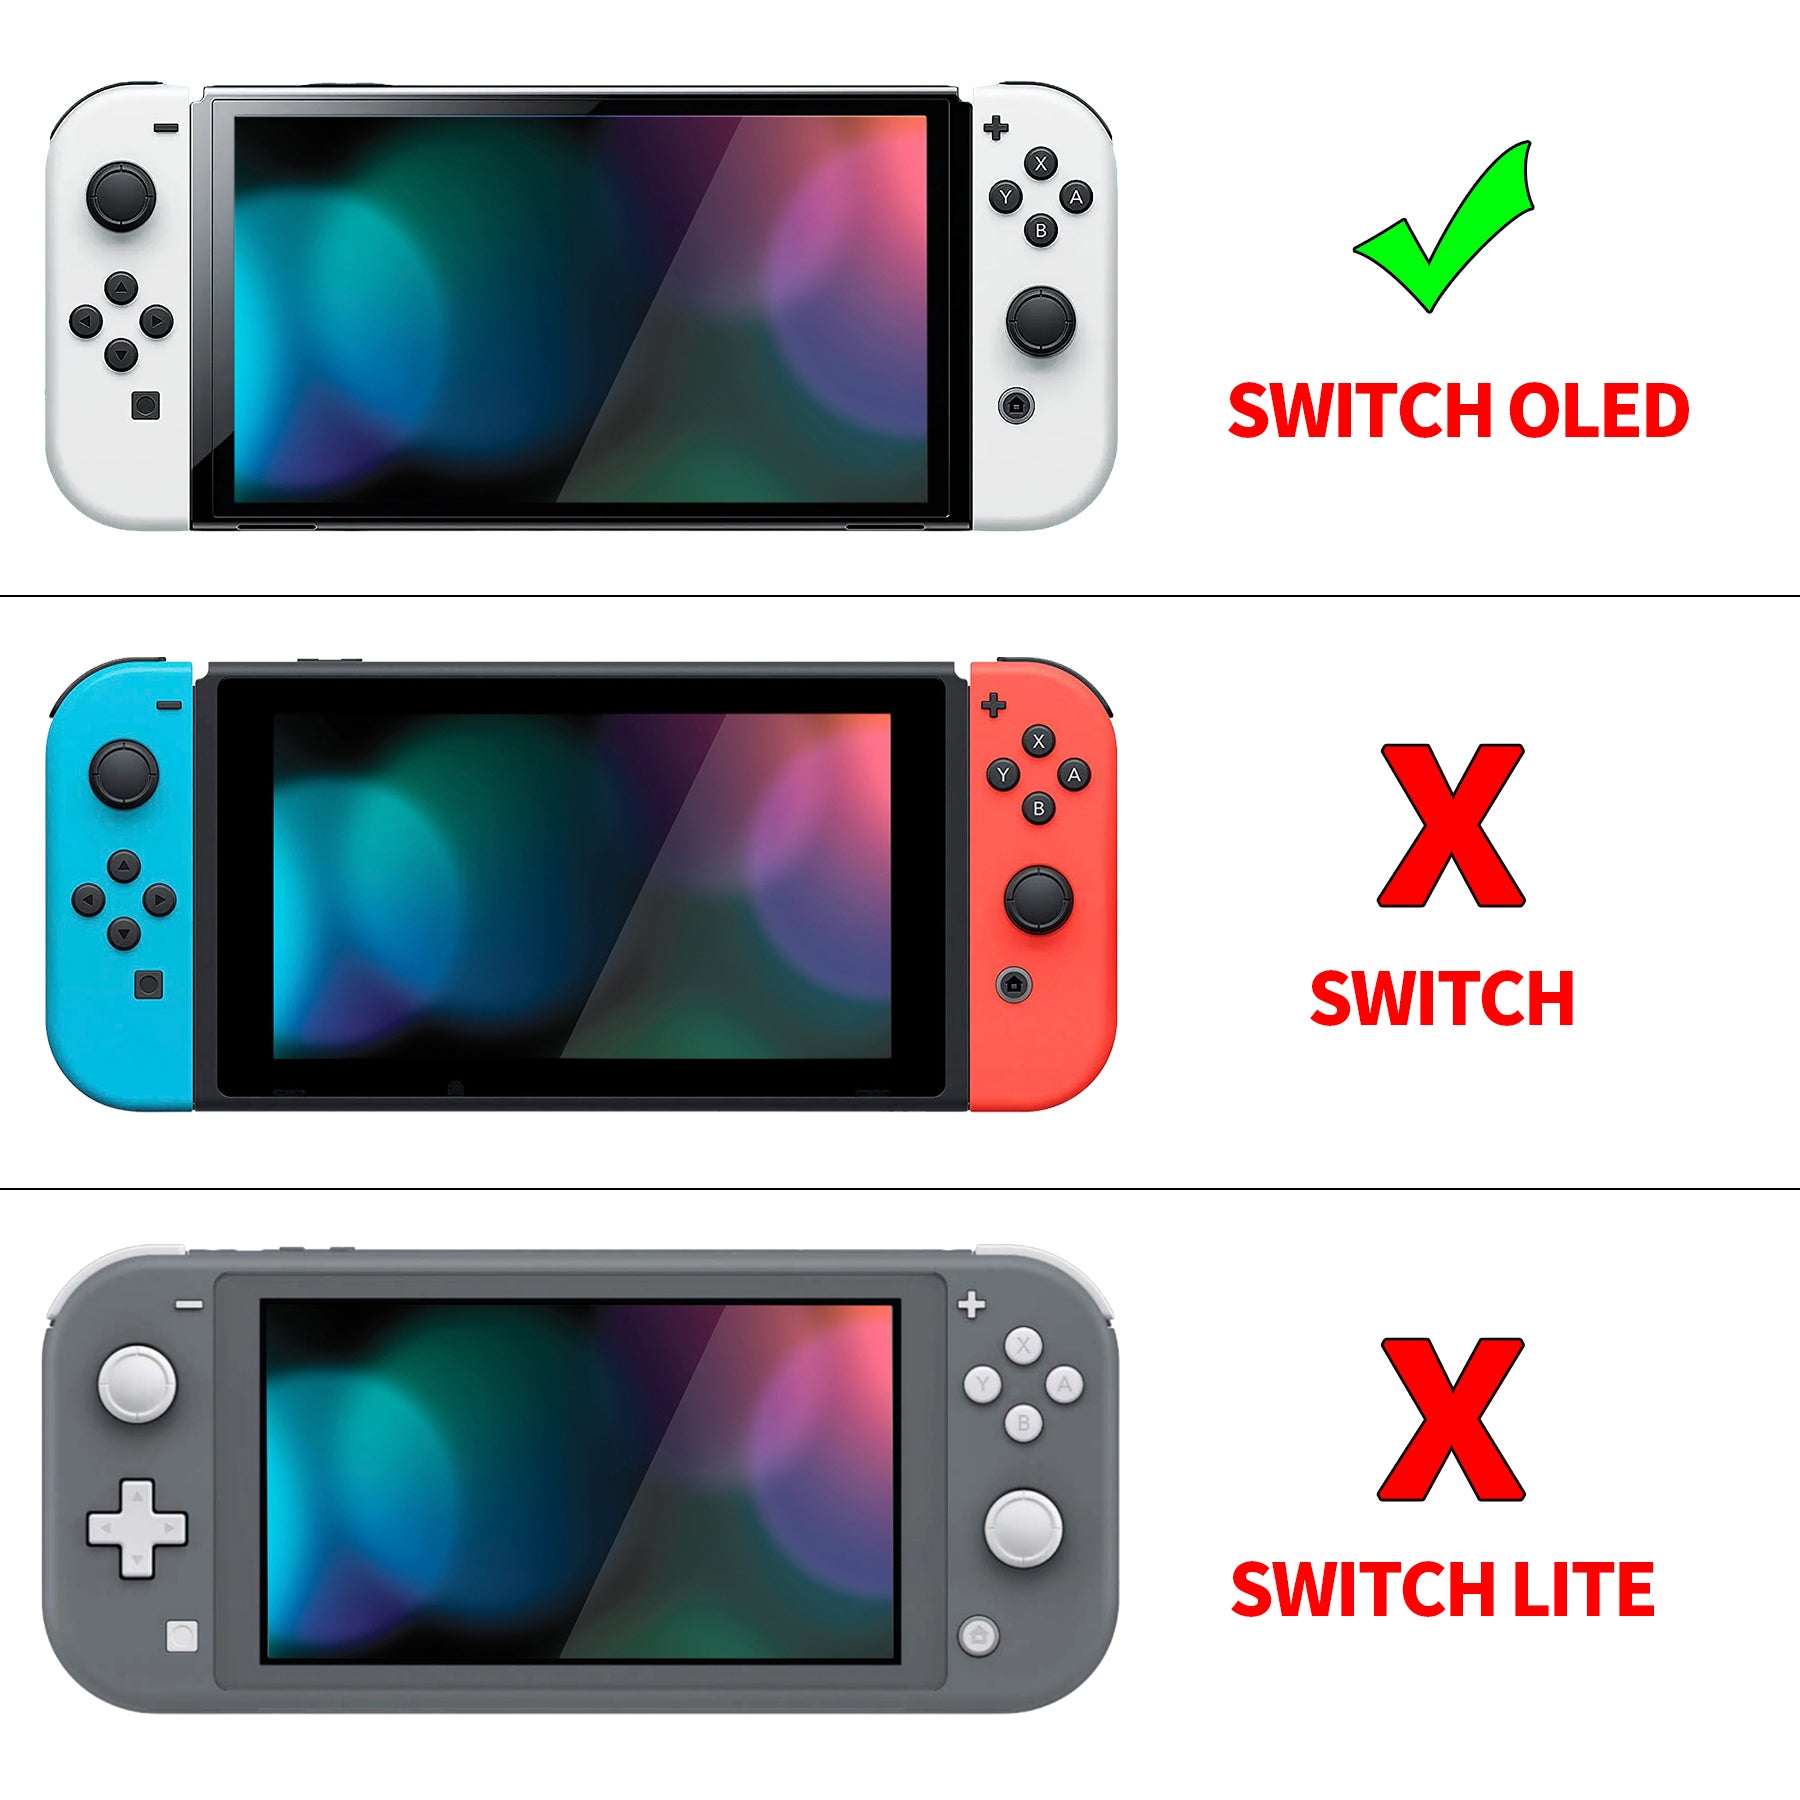 PlayVital ZealProtect Soft Protective Case for Switch OLED, Flexible Protector Joycon Grip Cover for Switch OLED with Thumb Grip Caps & ABXY Direction Button Caps - ICY Cube Penguin - XSOYV6011 playvital